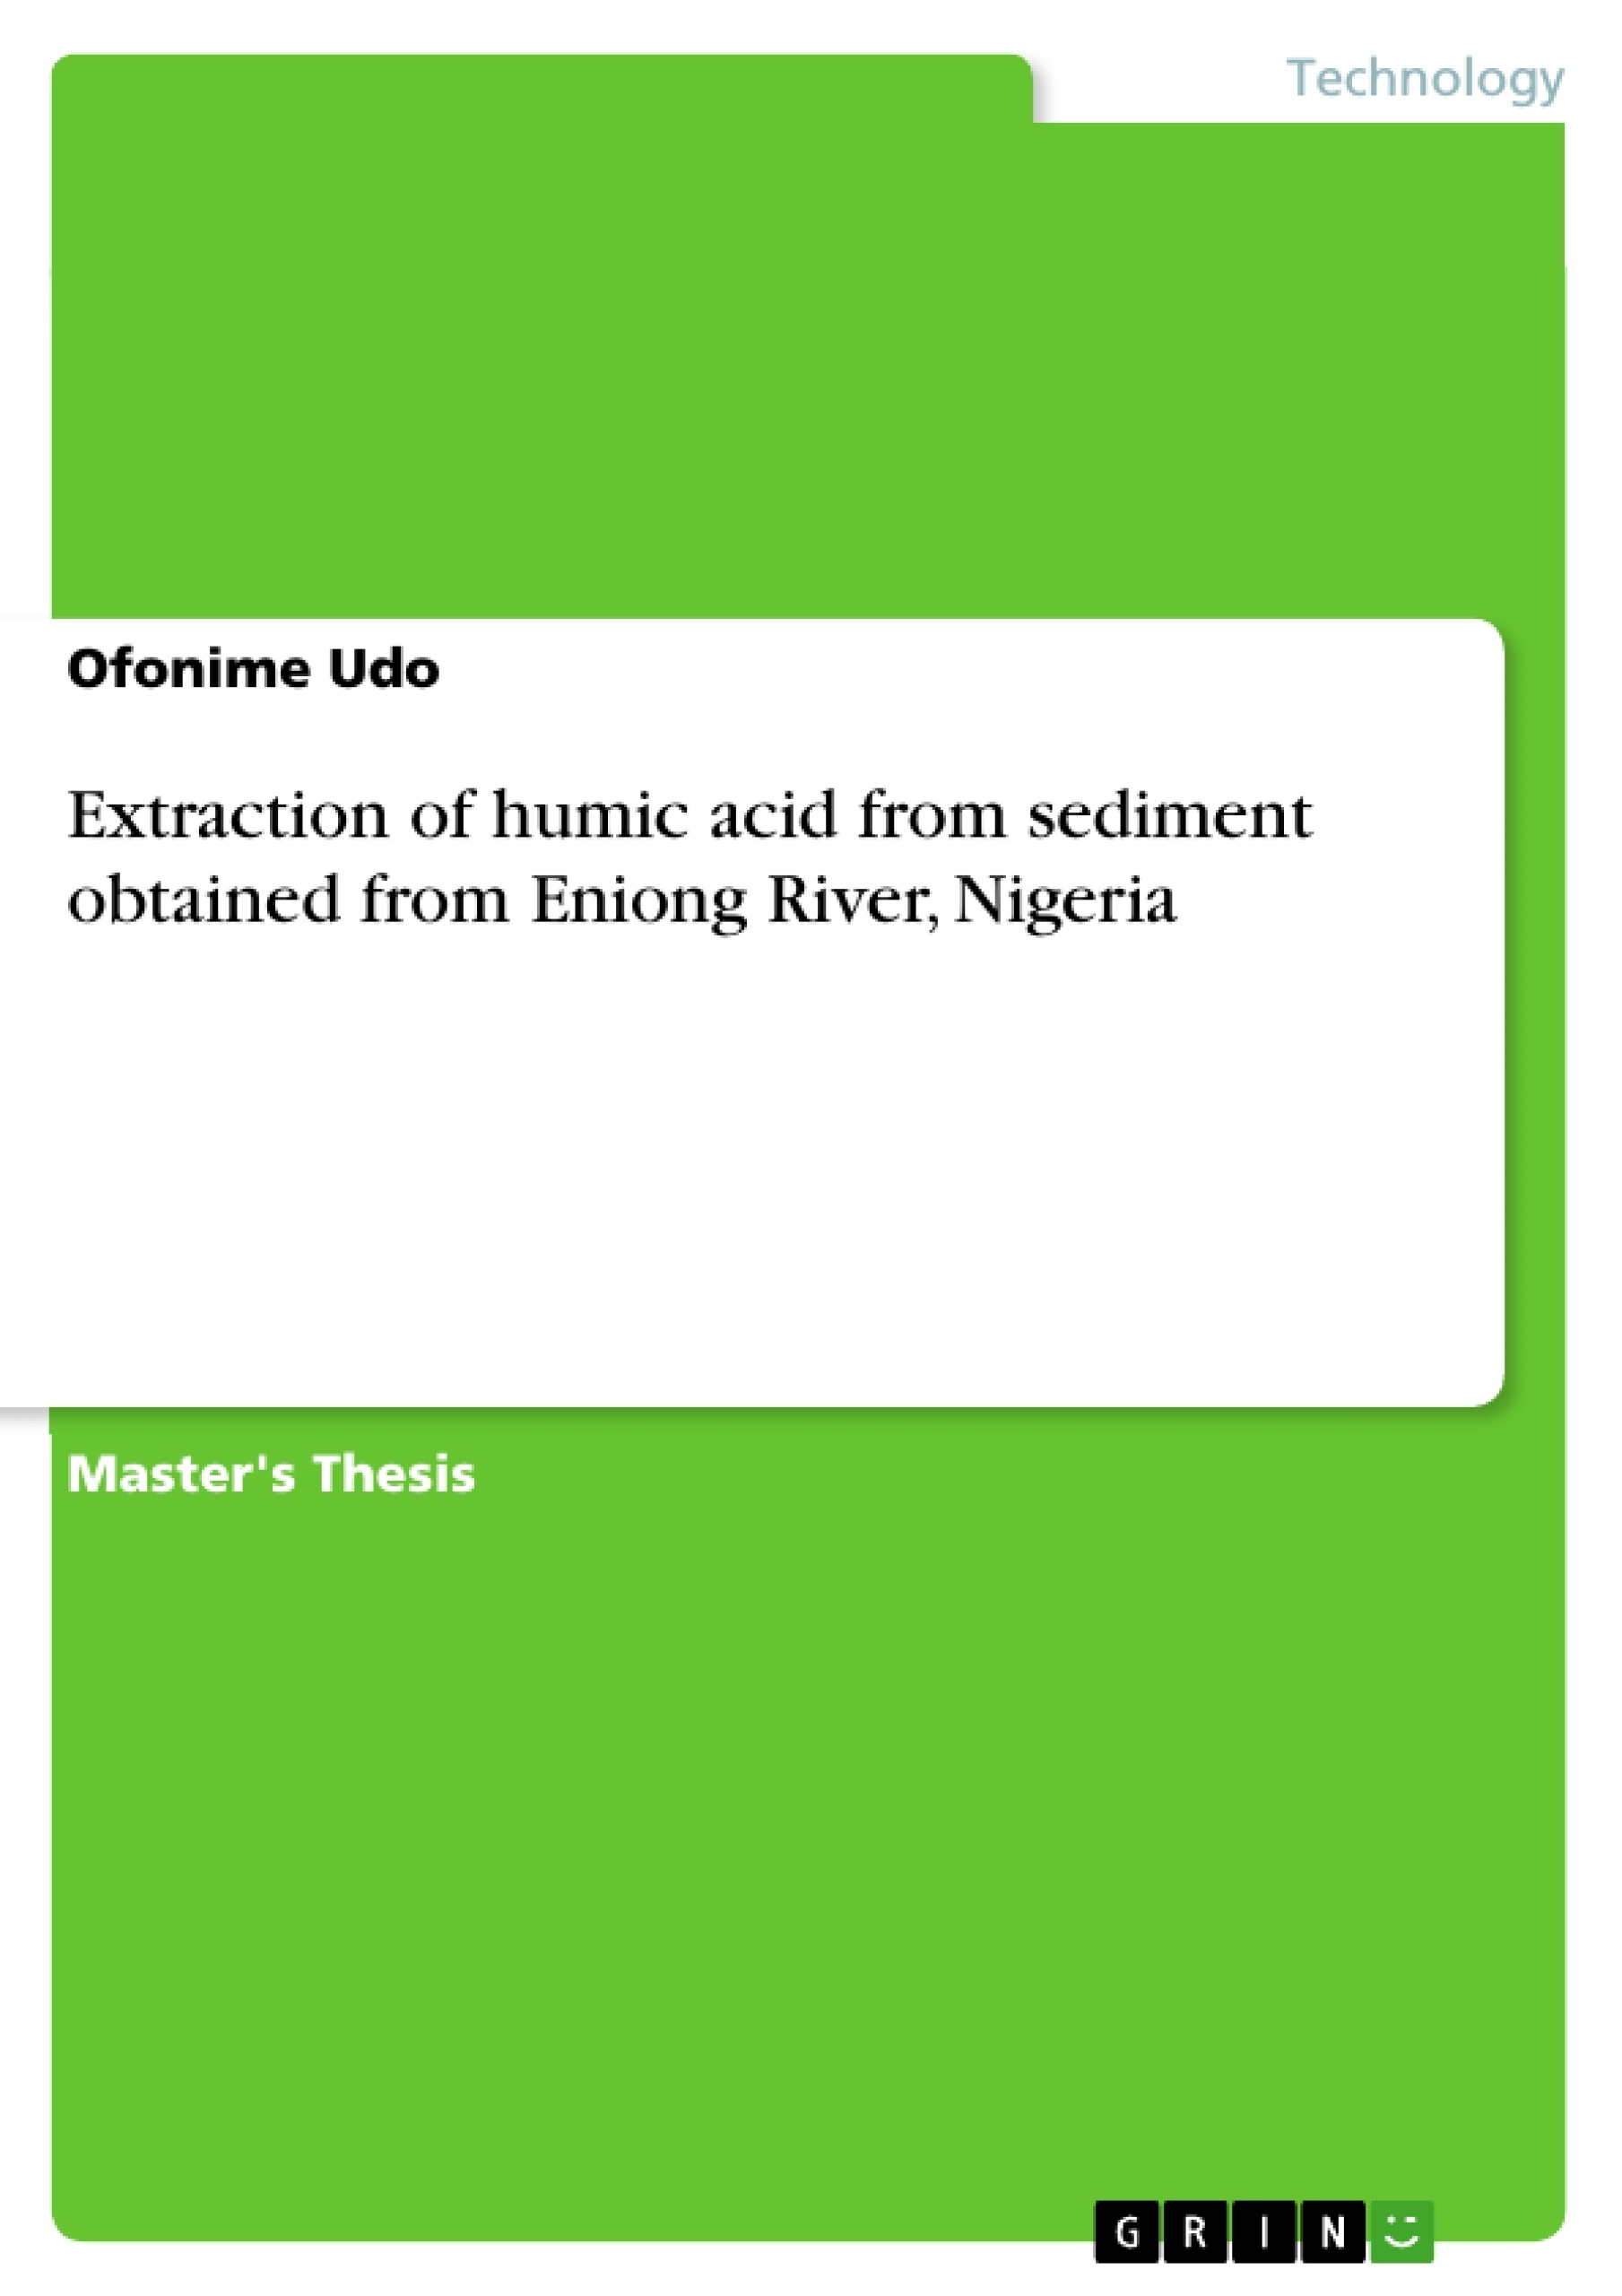 Titel: Extraction of humic acid from sediment obtained from Eniong River, Nigeria